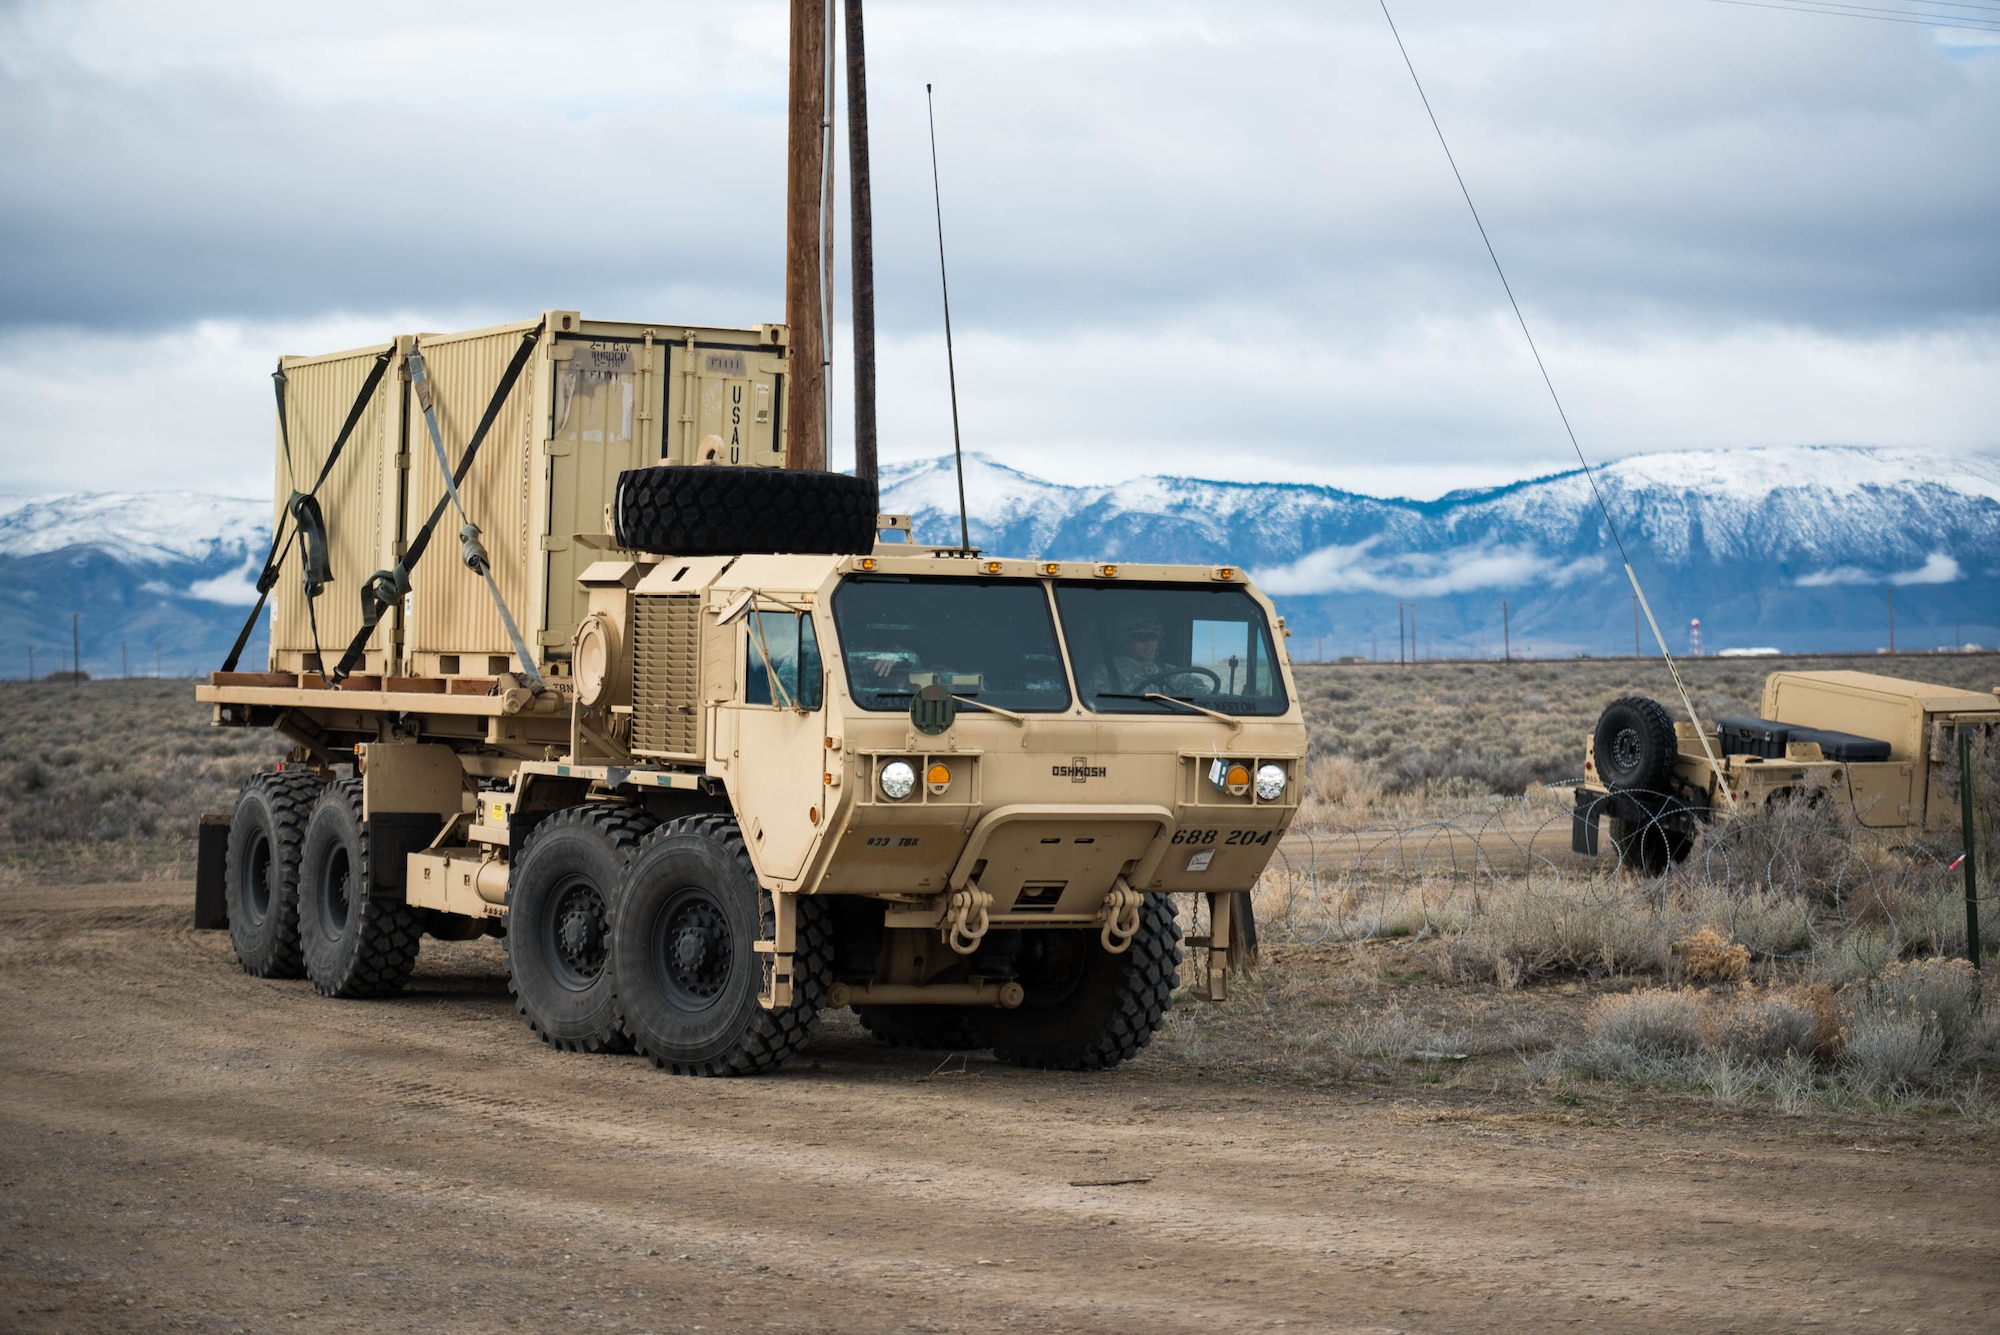 Soldiers from the U.S. Army’s 688th Rapid Port Opening Element drive a Load Handling System vehicle to the forward operating node at Amedee Army Airfield, Calif., to unload cargo March 9, 2016. The 688th RPOE is working in conjunction with the Kentucky Air National Guard’s 123rd Contingency Response Group and a team from the Defense Logistics Agency to operate Joint Task Force-Port Opening Sangala during a week-long exercise called Operation Lumberjack. The objective of the JTF-PO is to establish an aerial port of debarkation, provide initial distribution capability and set up warehousing for distribution beyond the forward node. (Kentucky Air National Guard photo by Master Sgt. Phil Speck)